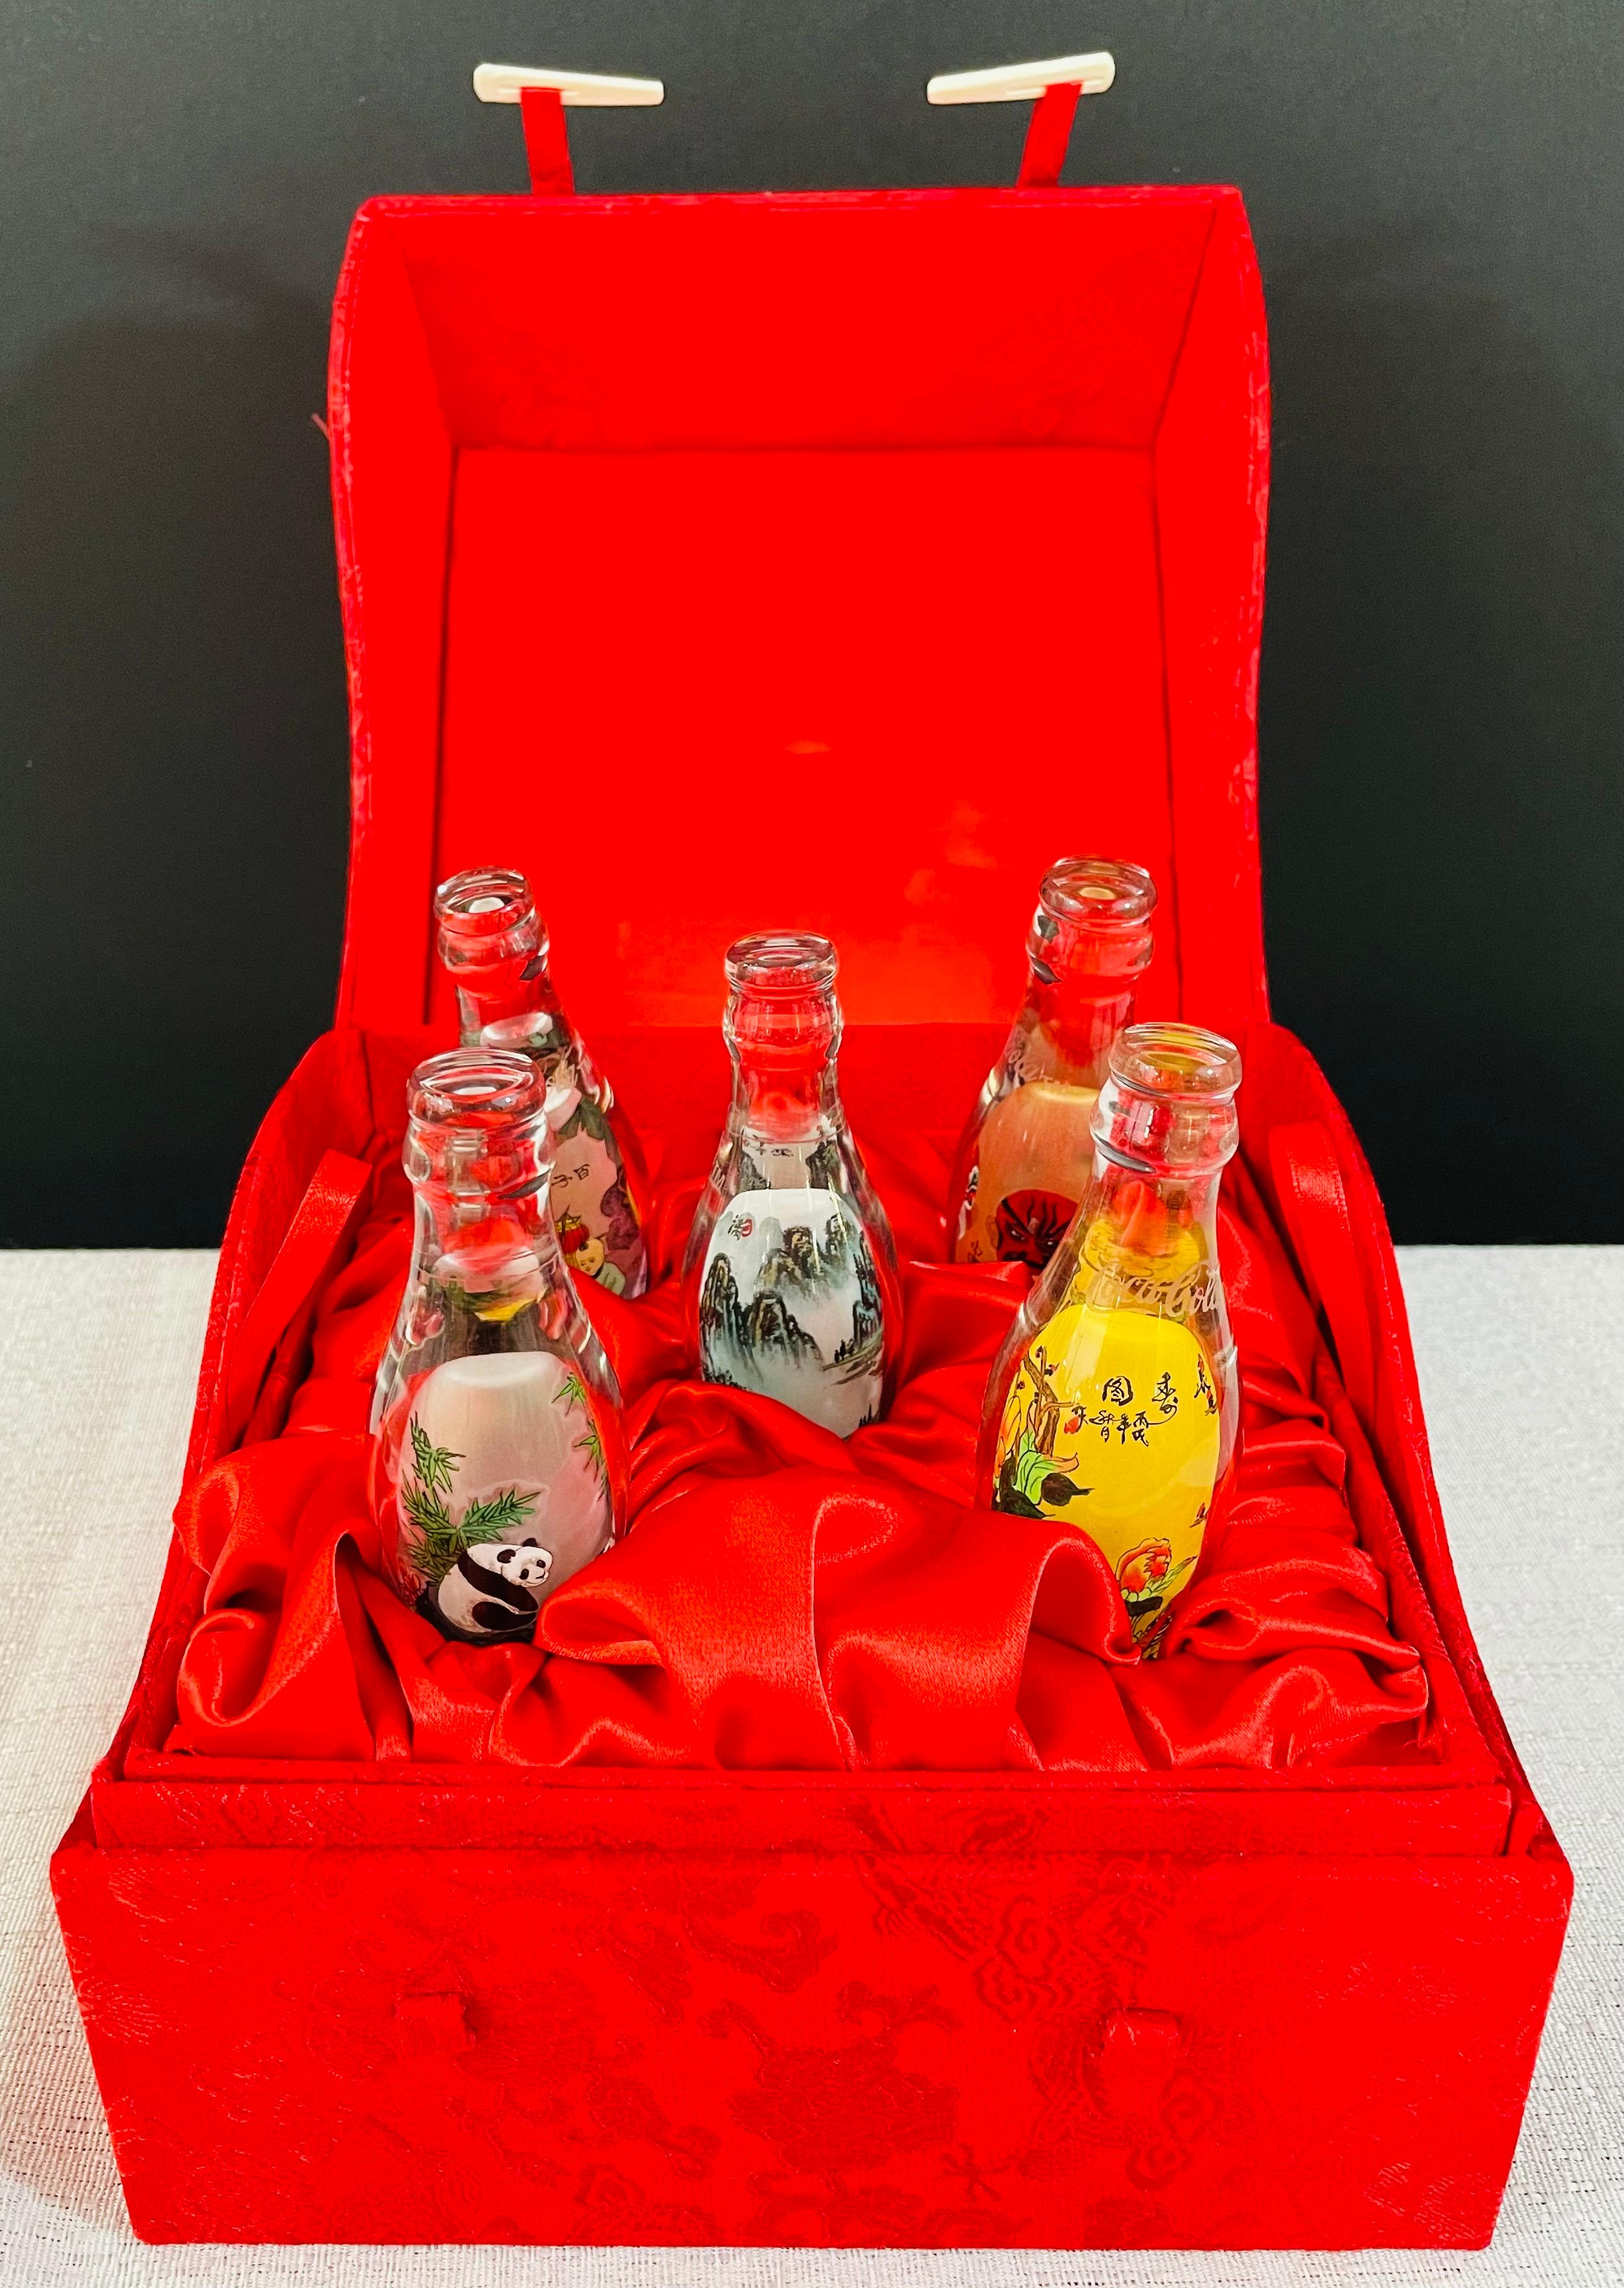 A custom made special edition Coca-Cola set of 5 miniature glass bottles. Each bottle is handprinted to portray traditional Chinese emblems such as masks, floral and figural design, panda as well as landscape. The bottles are raised on a round hand